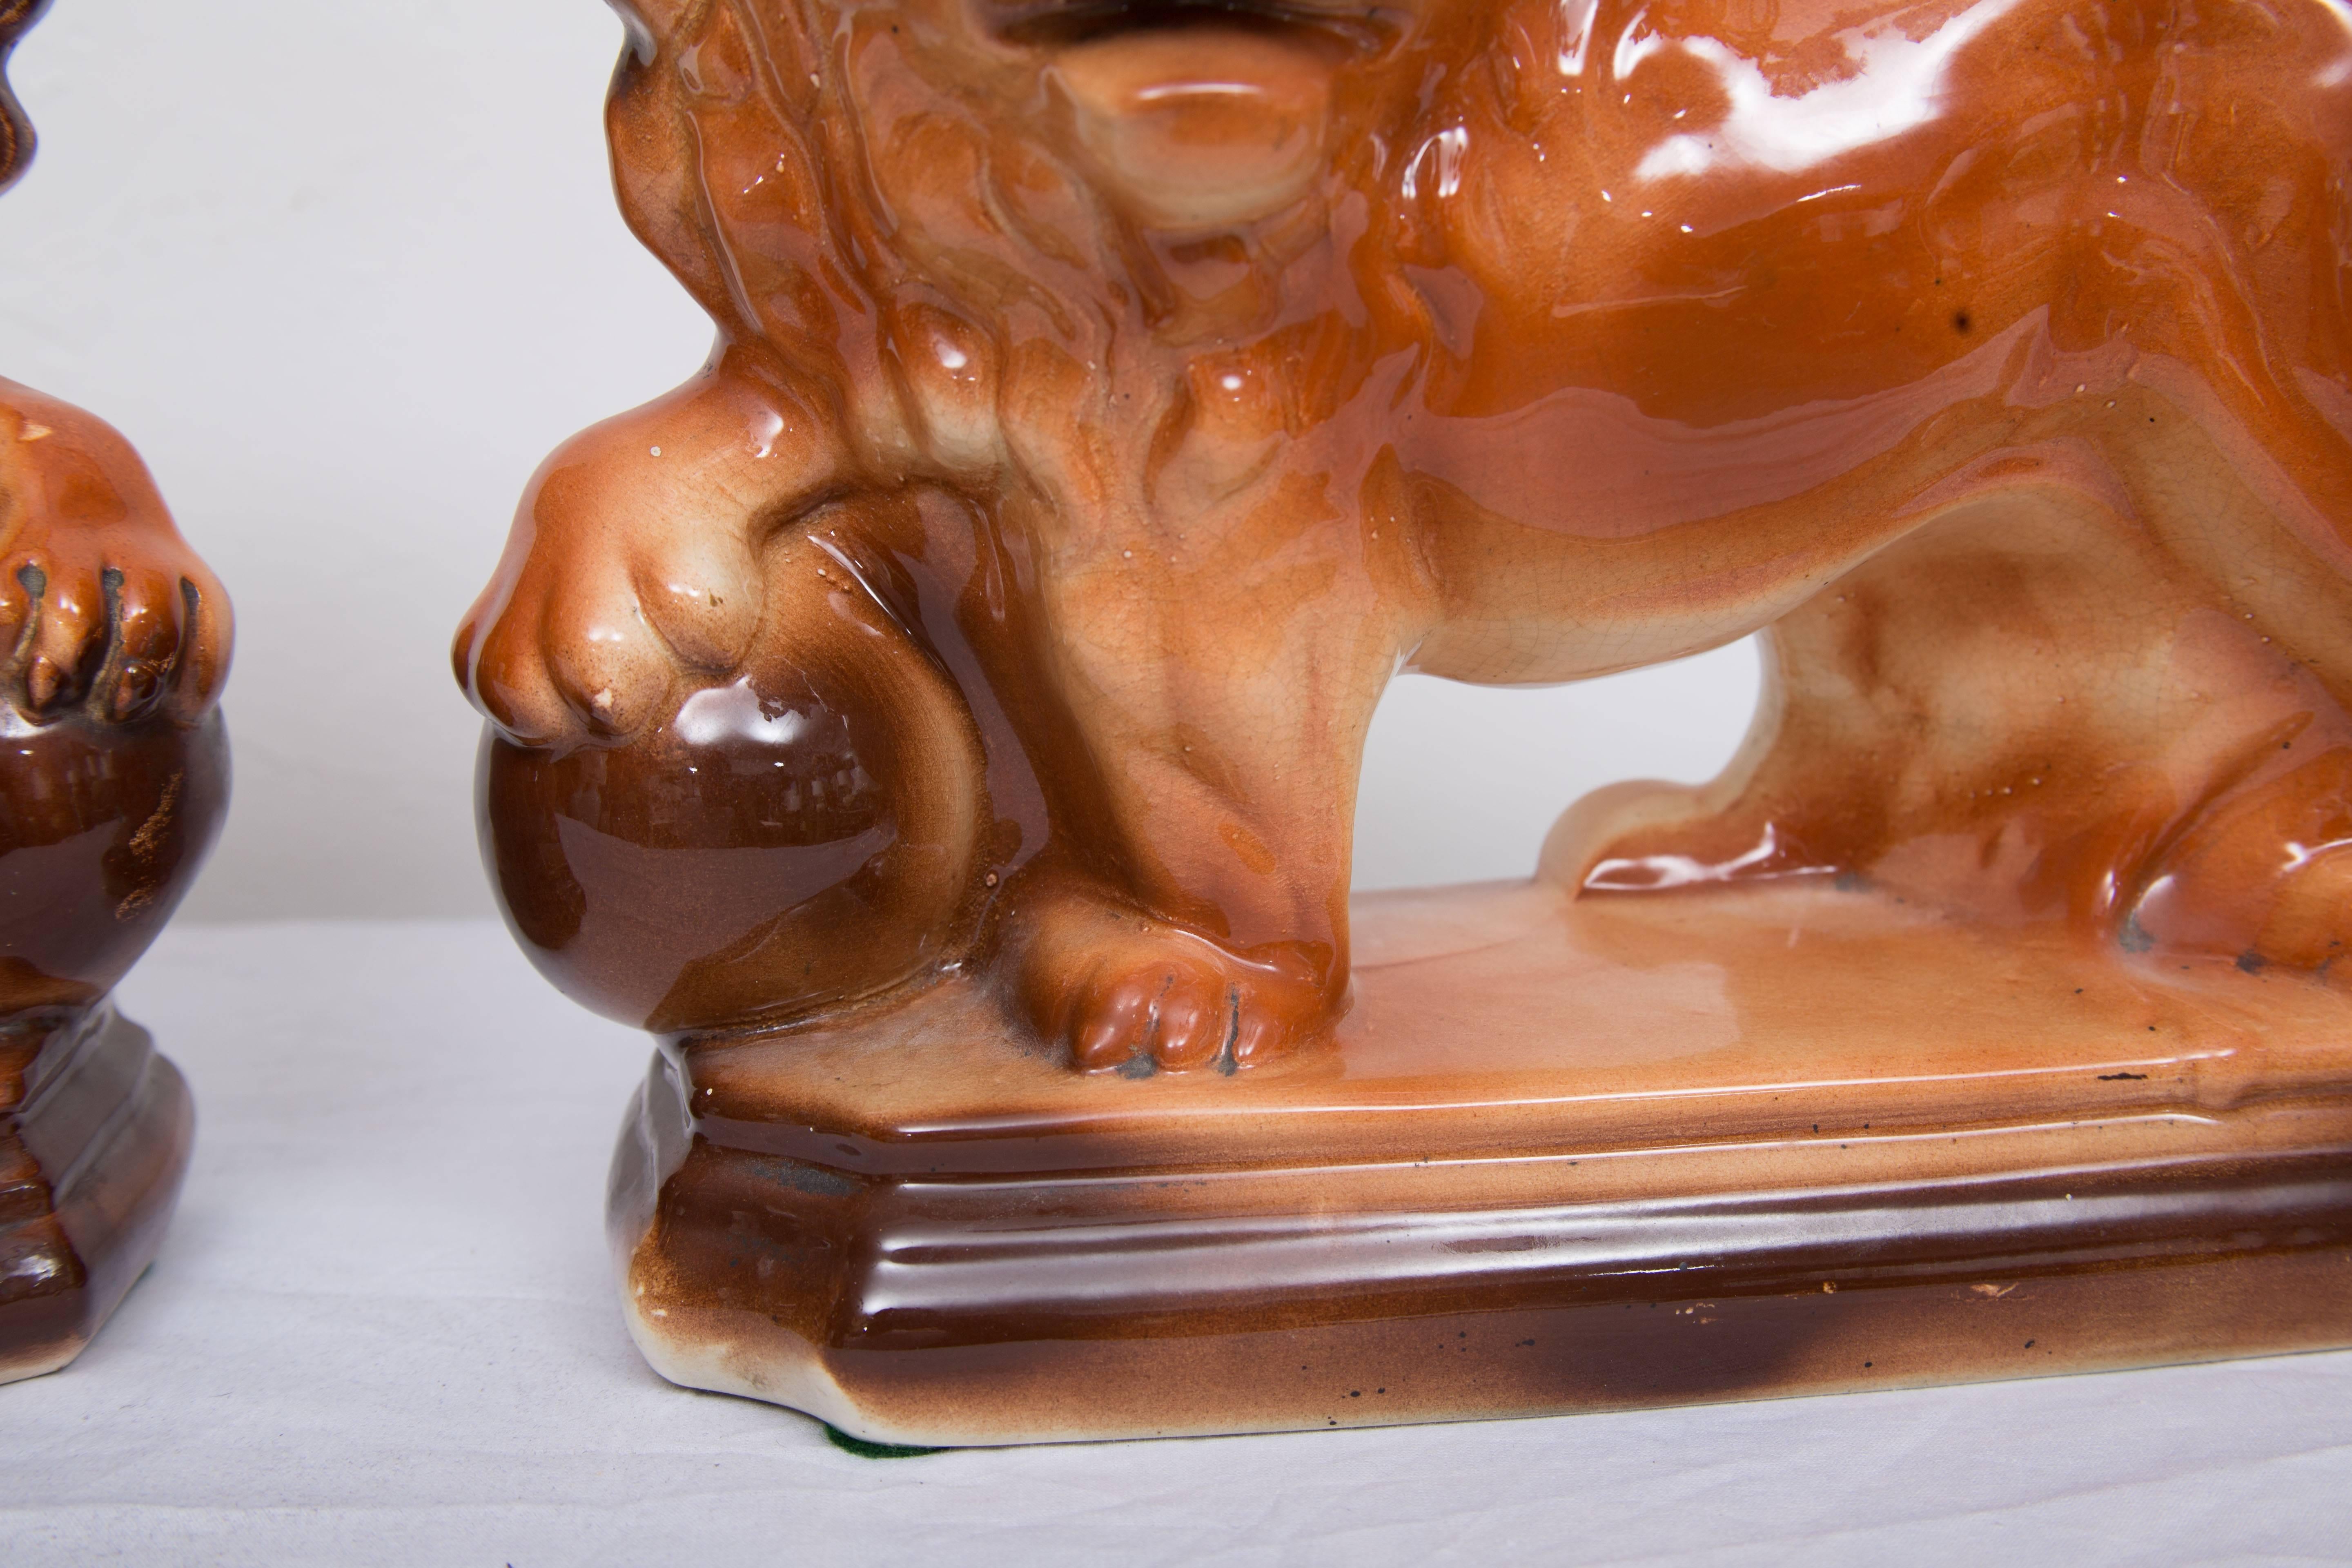 English Pair of Ceramic and Glazed Lions by Lancaster & Sons (Hanley) Ltd (L&S)